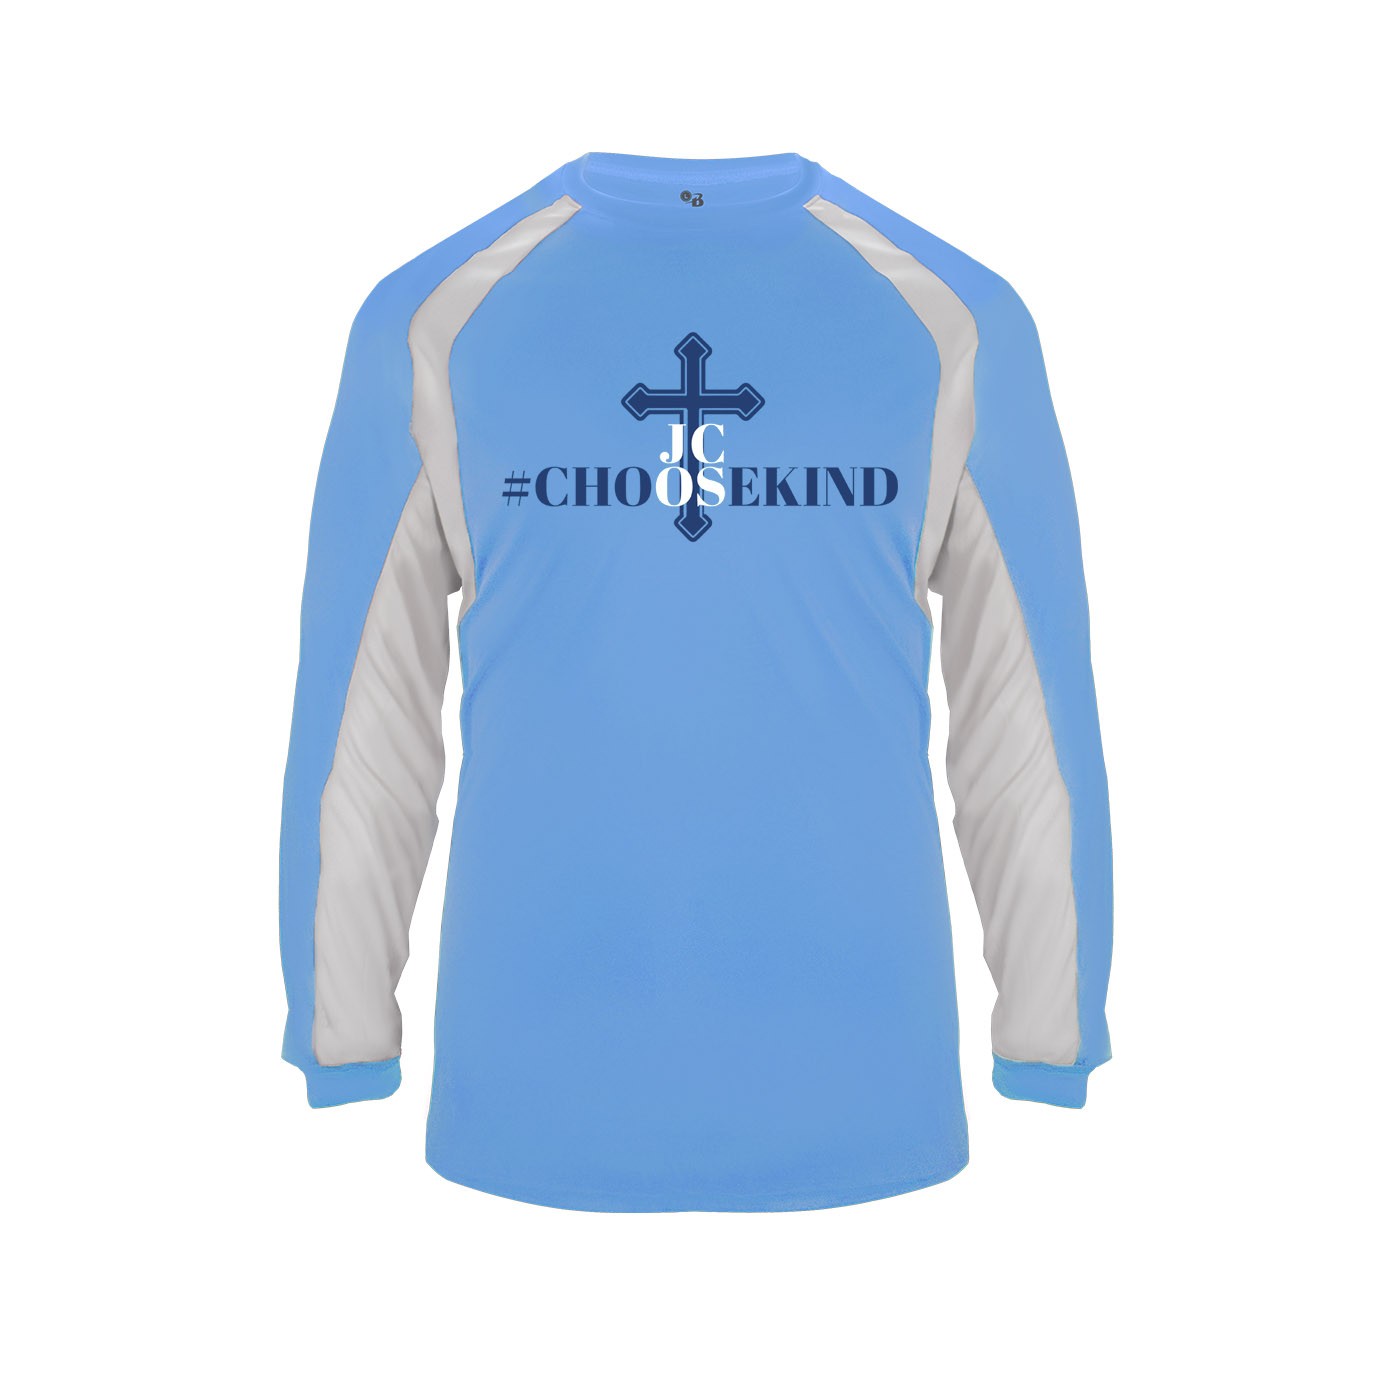 JCOS Staff Hook L/S T-Shirt w/ Choose Kind Logo #F40 - Please Allow 3-4 Weeks for Delivery